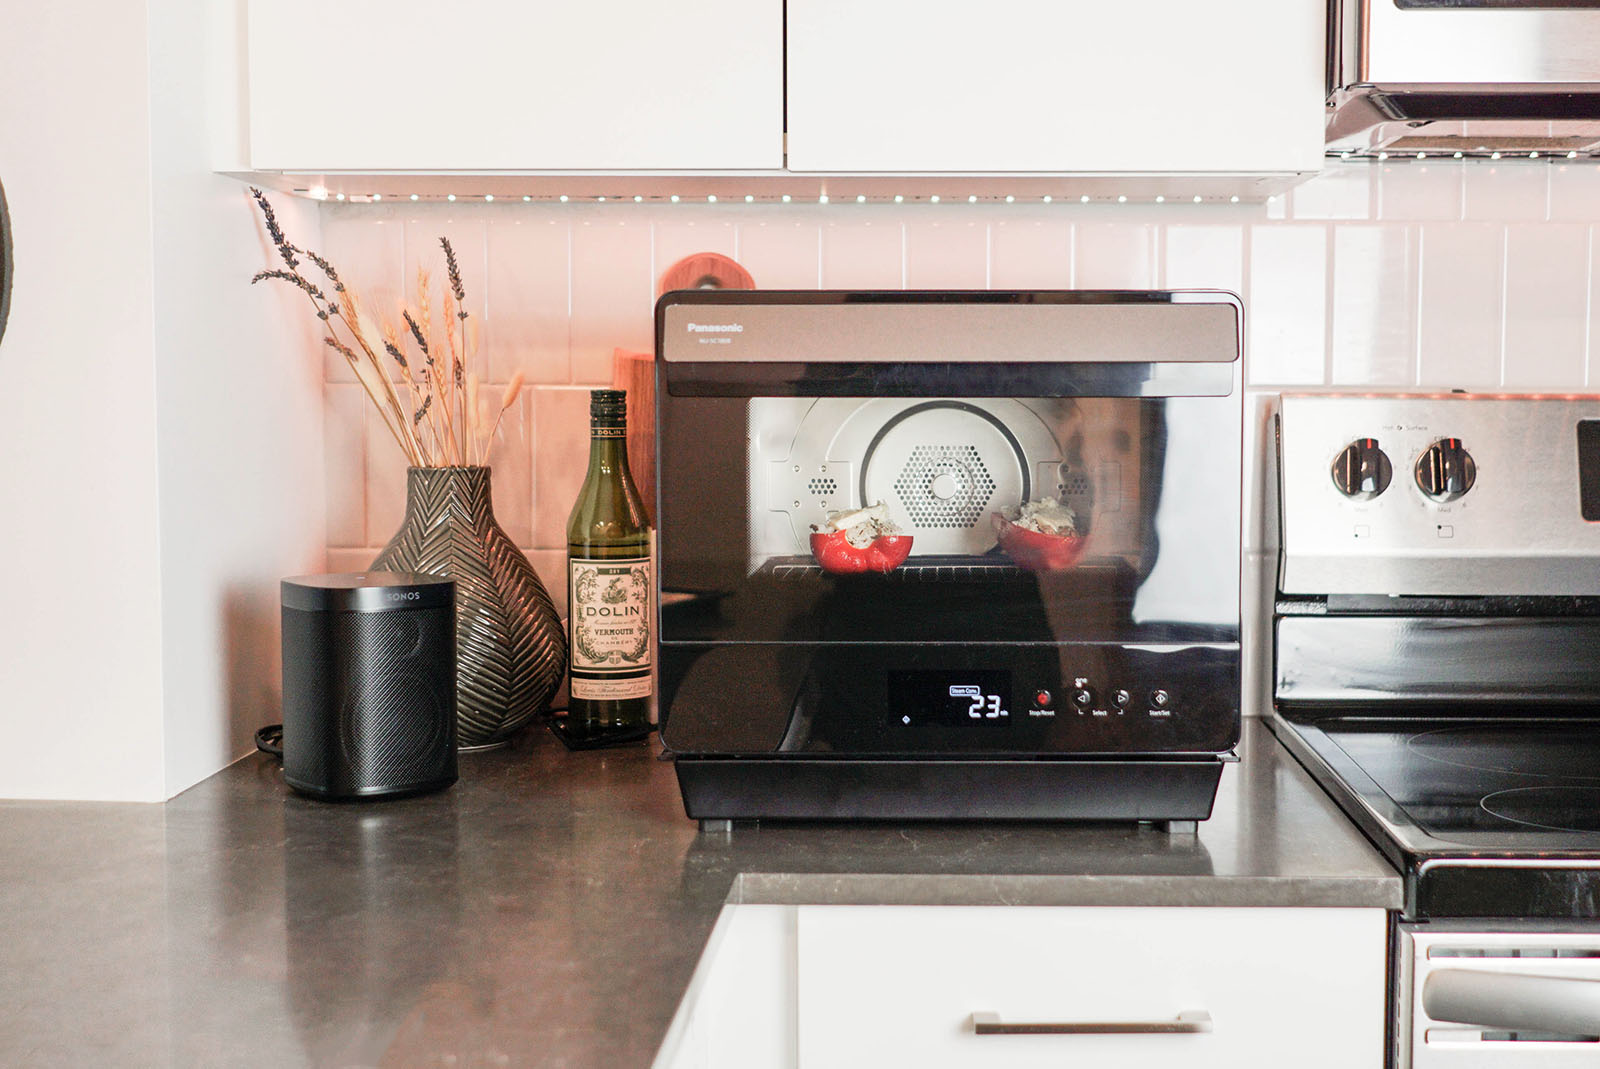 Panasonic air fry true convection steam toaster oven review